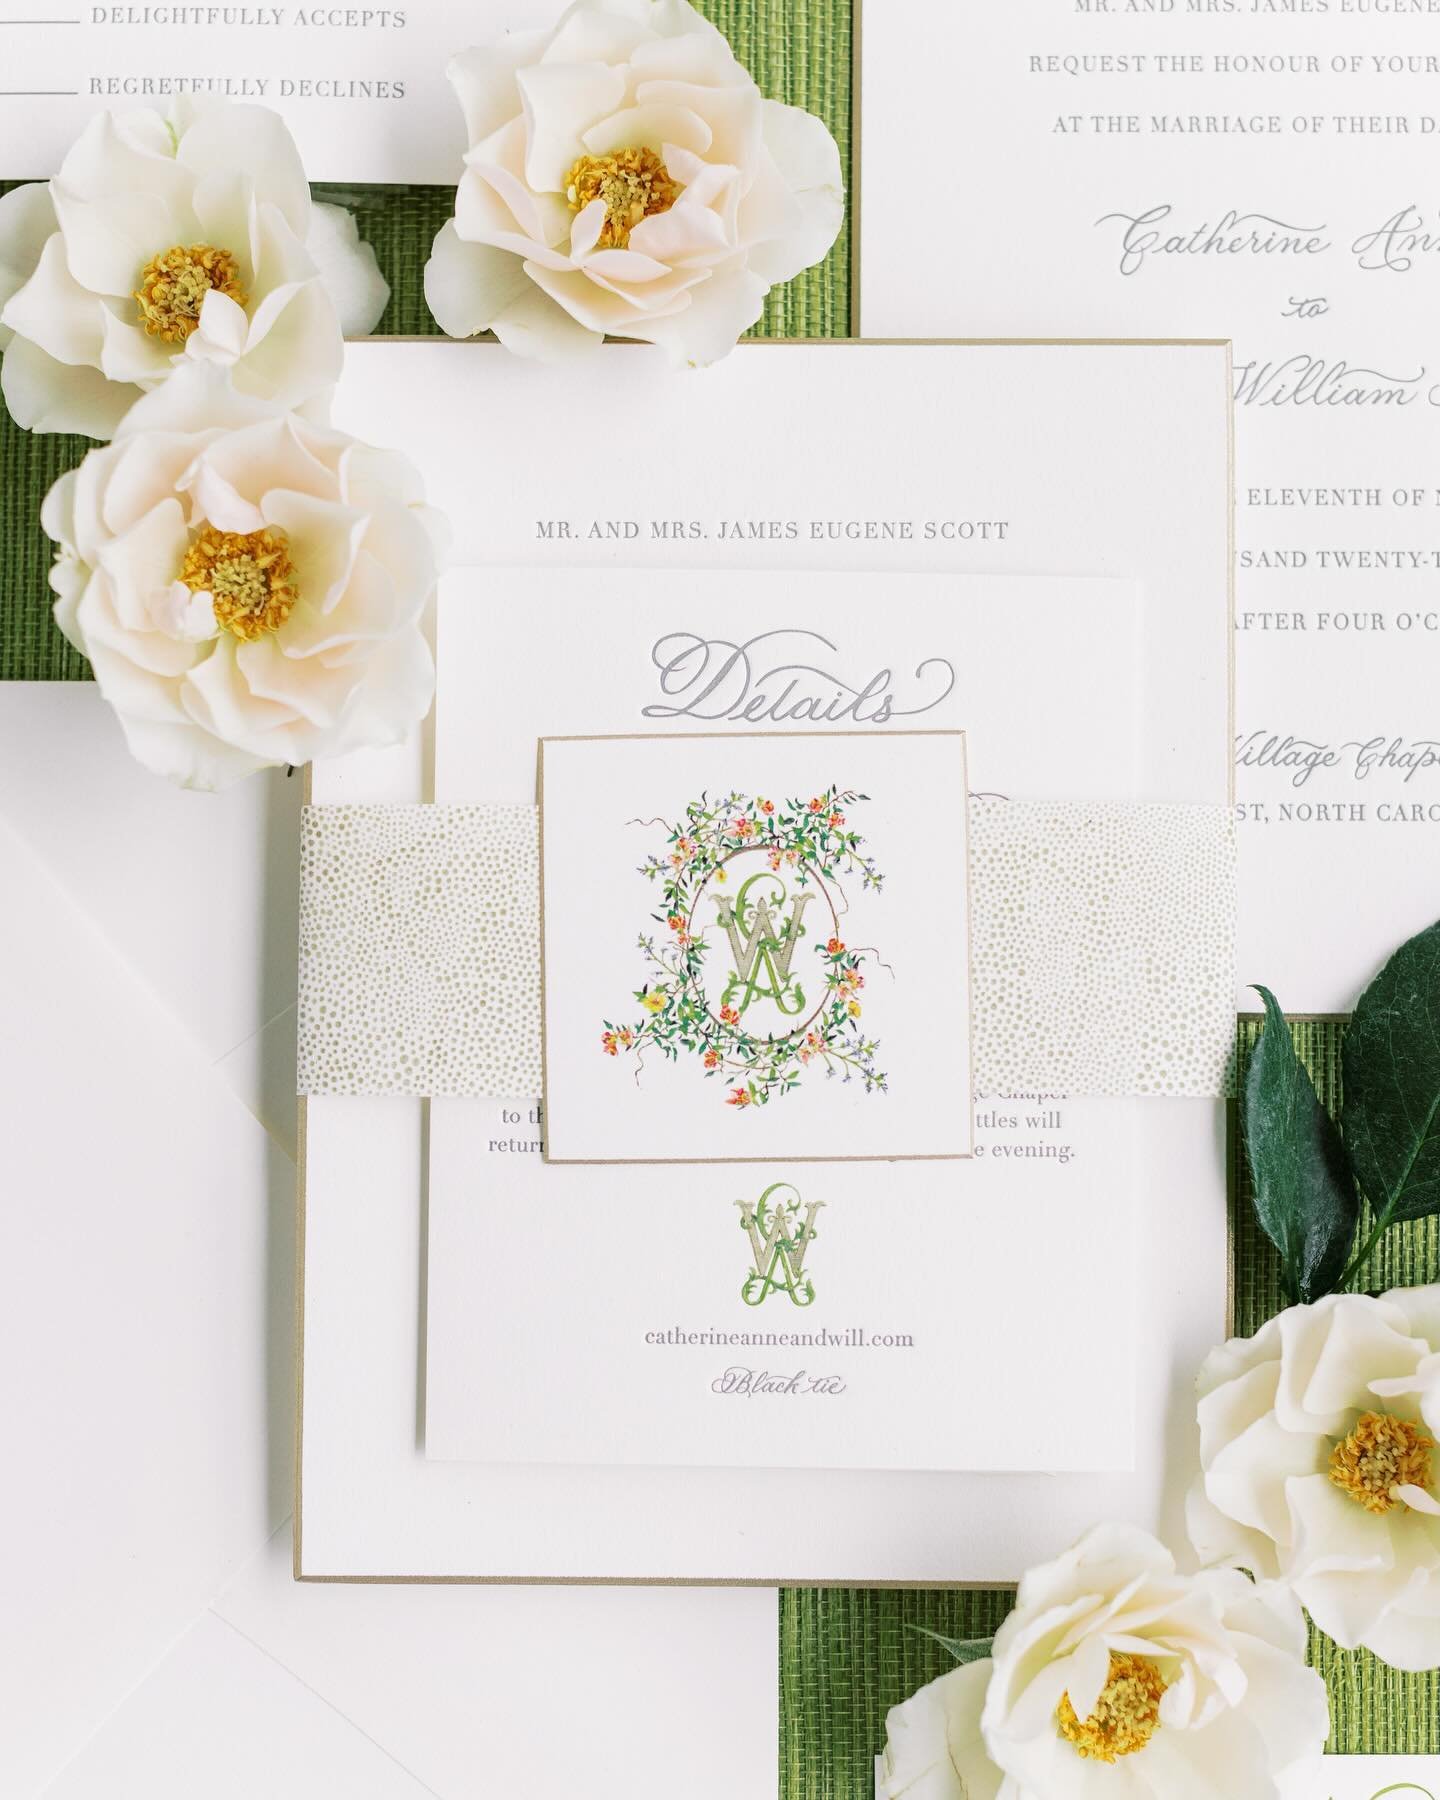 save the dates and invitations offer guests a sneak peek into your wedding weekend, setting the stage for what&rsquo;s to come! catherine anne and will&rsquo;s wedding stationery did just that&hellip; complete with our favorite bells and whistles inc